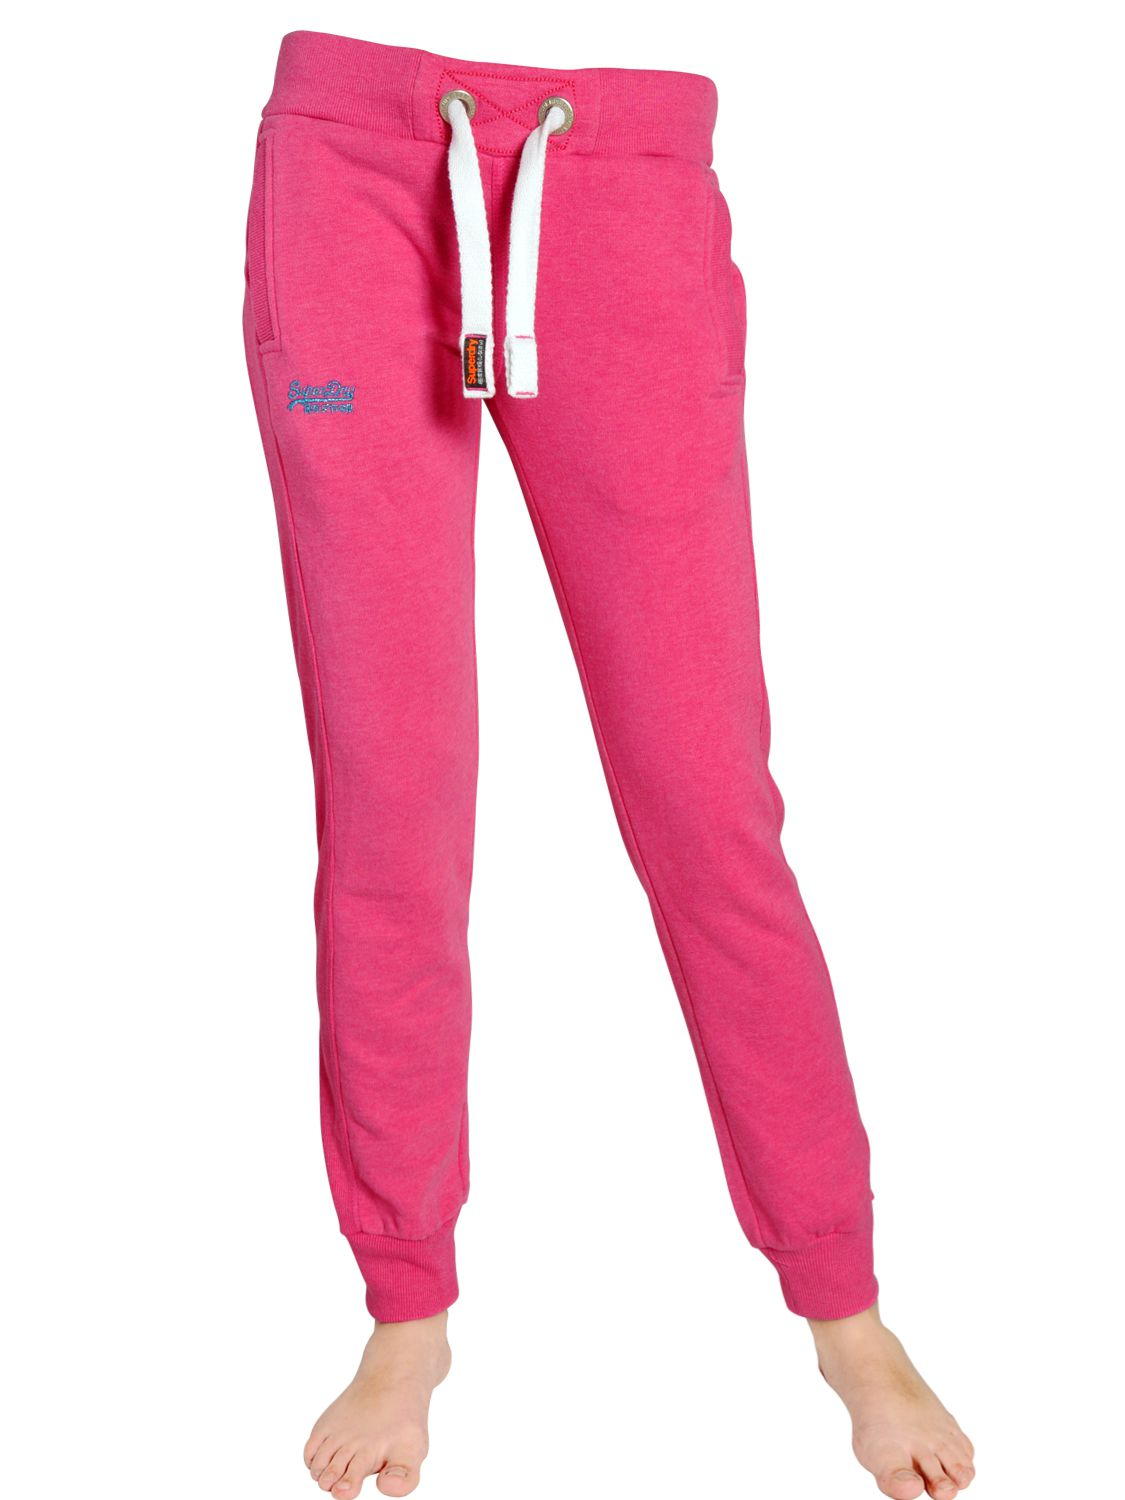 Lyst - Superdry Slim Cotton Jogging Trousers in Pink for Men